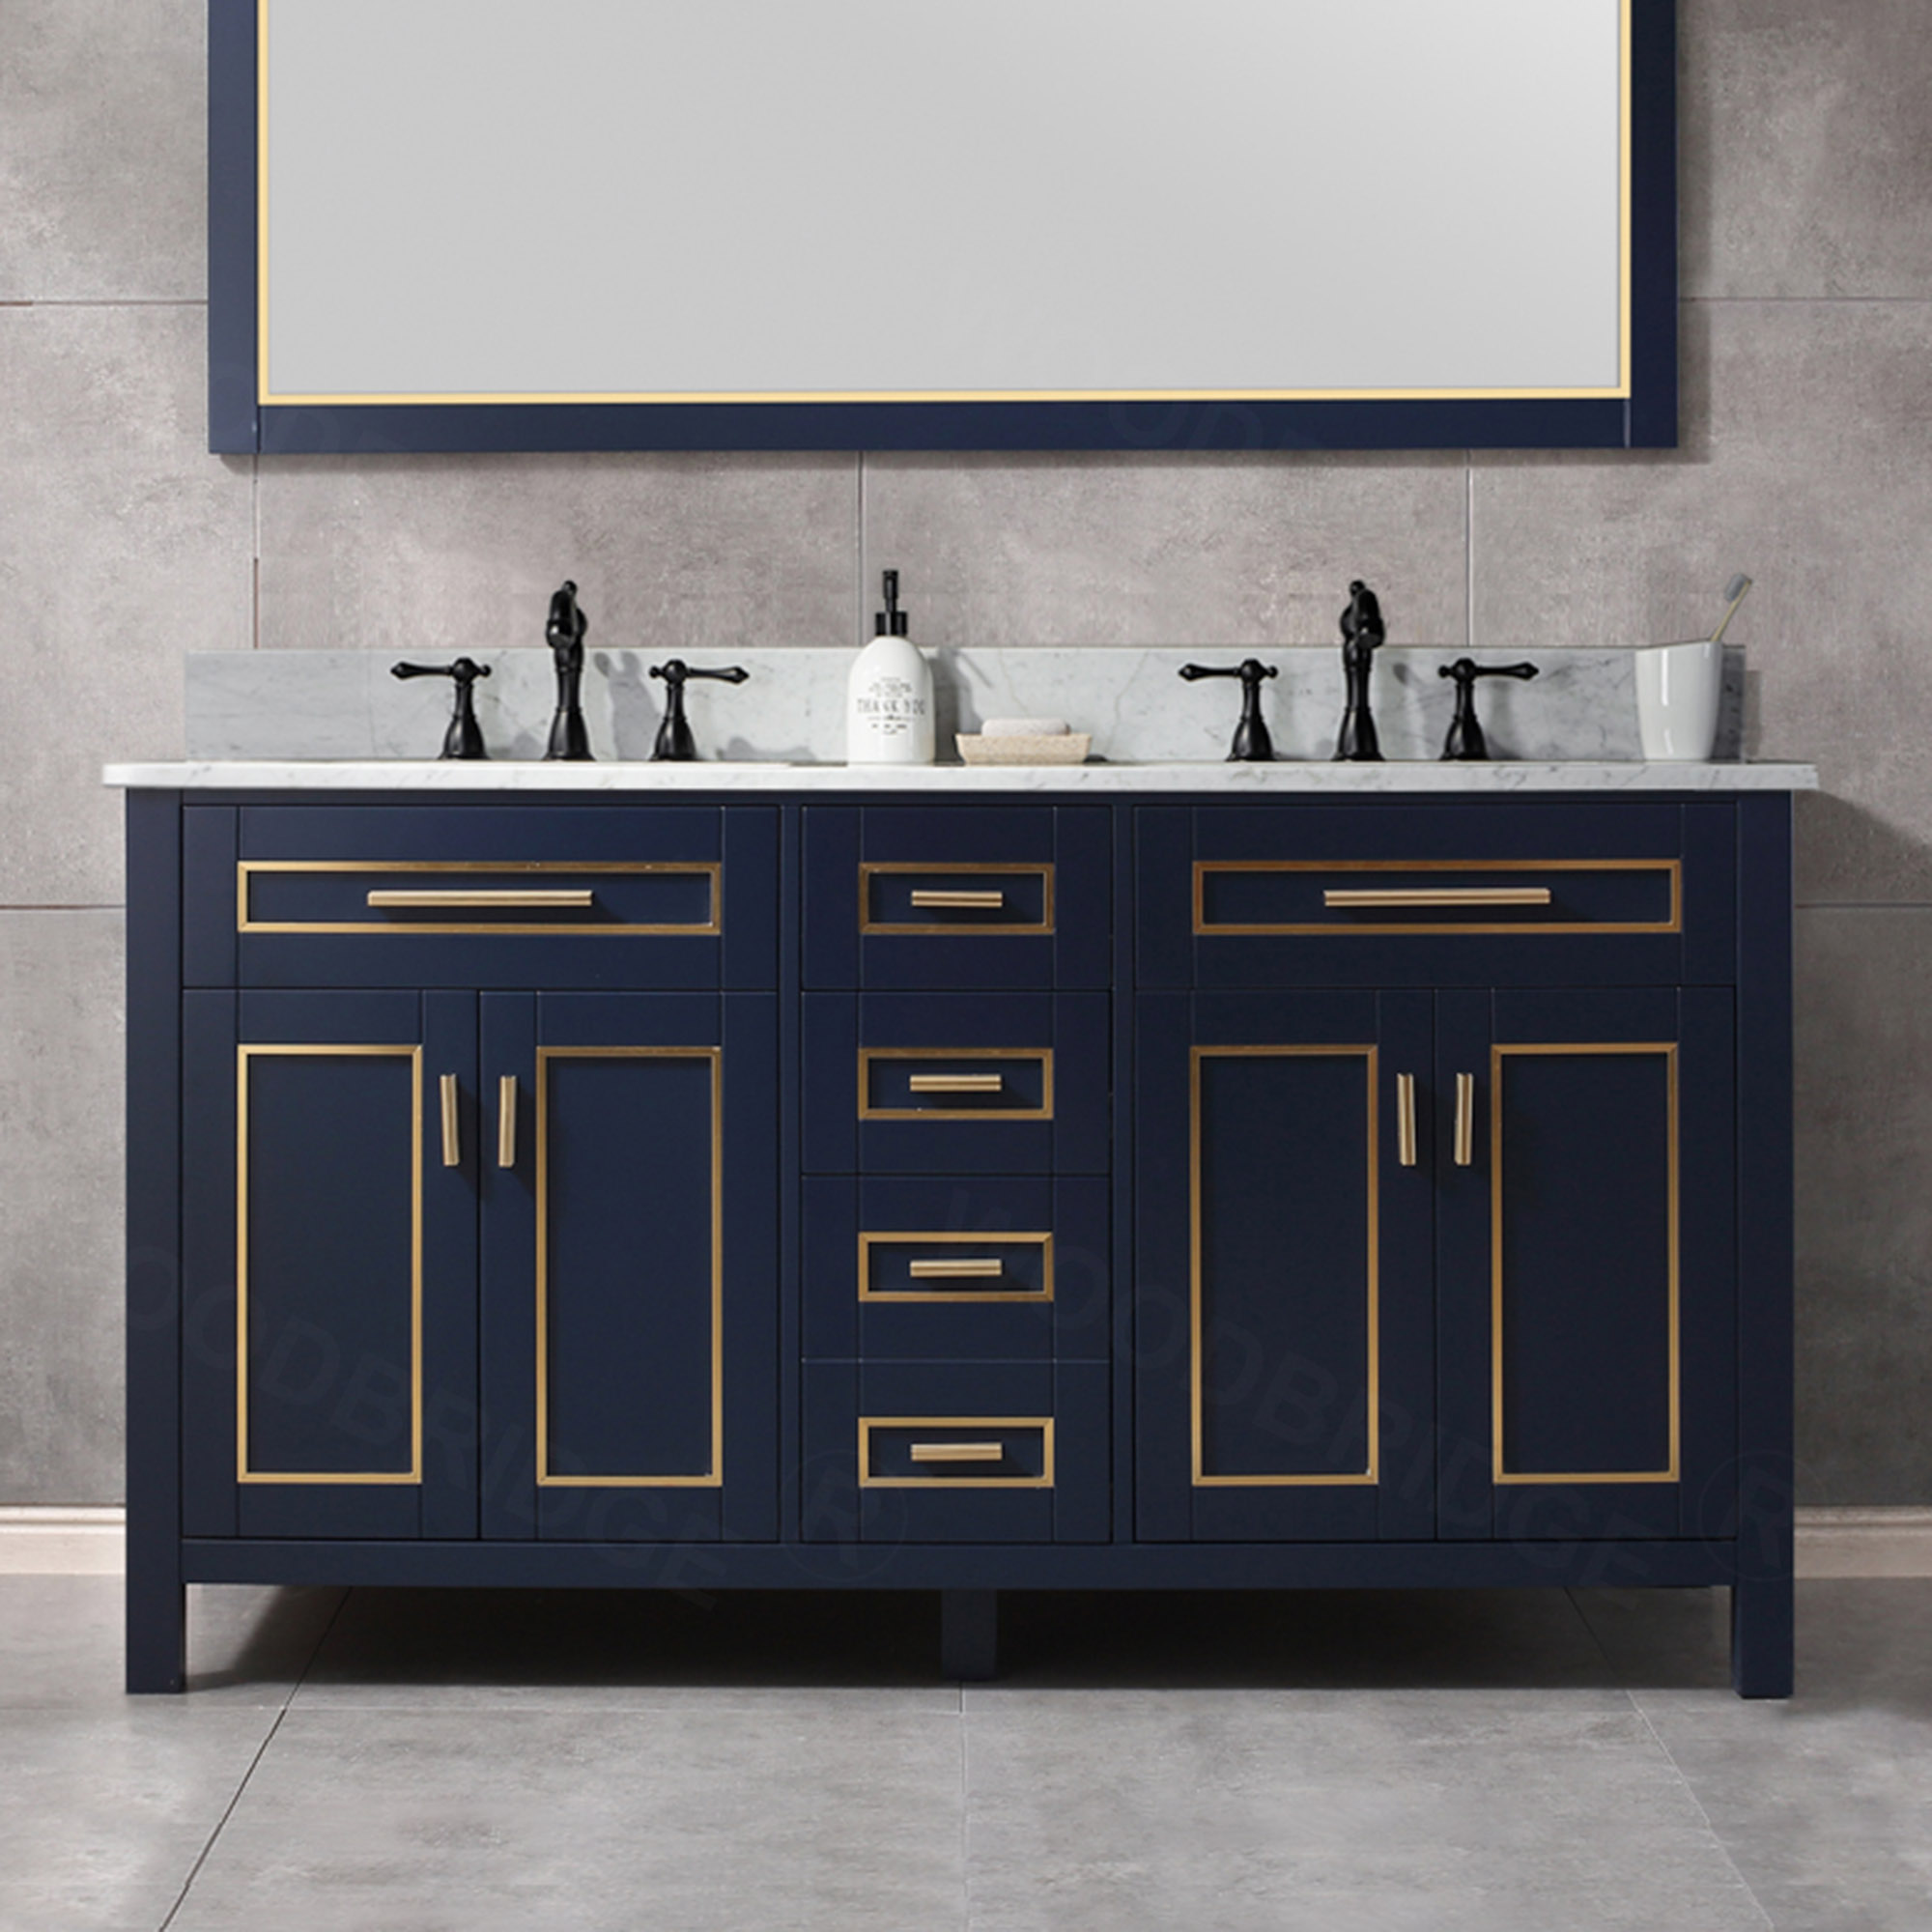 WOODBRIDGE Milan  61” Floor Mounted Single Basin Vanity Set with Solid Wood Cabinet in Navy Blue, and Carrara White Marble Vanity Top with Pre-installed Undermount Rectangle Bathroom Sink in White, Pre-Drilled 3-Hole for 4-inch Centerset Faucet